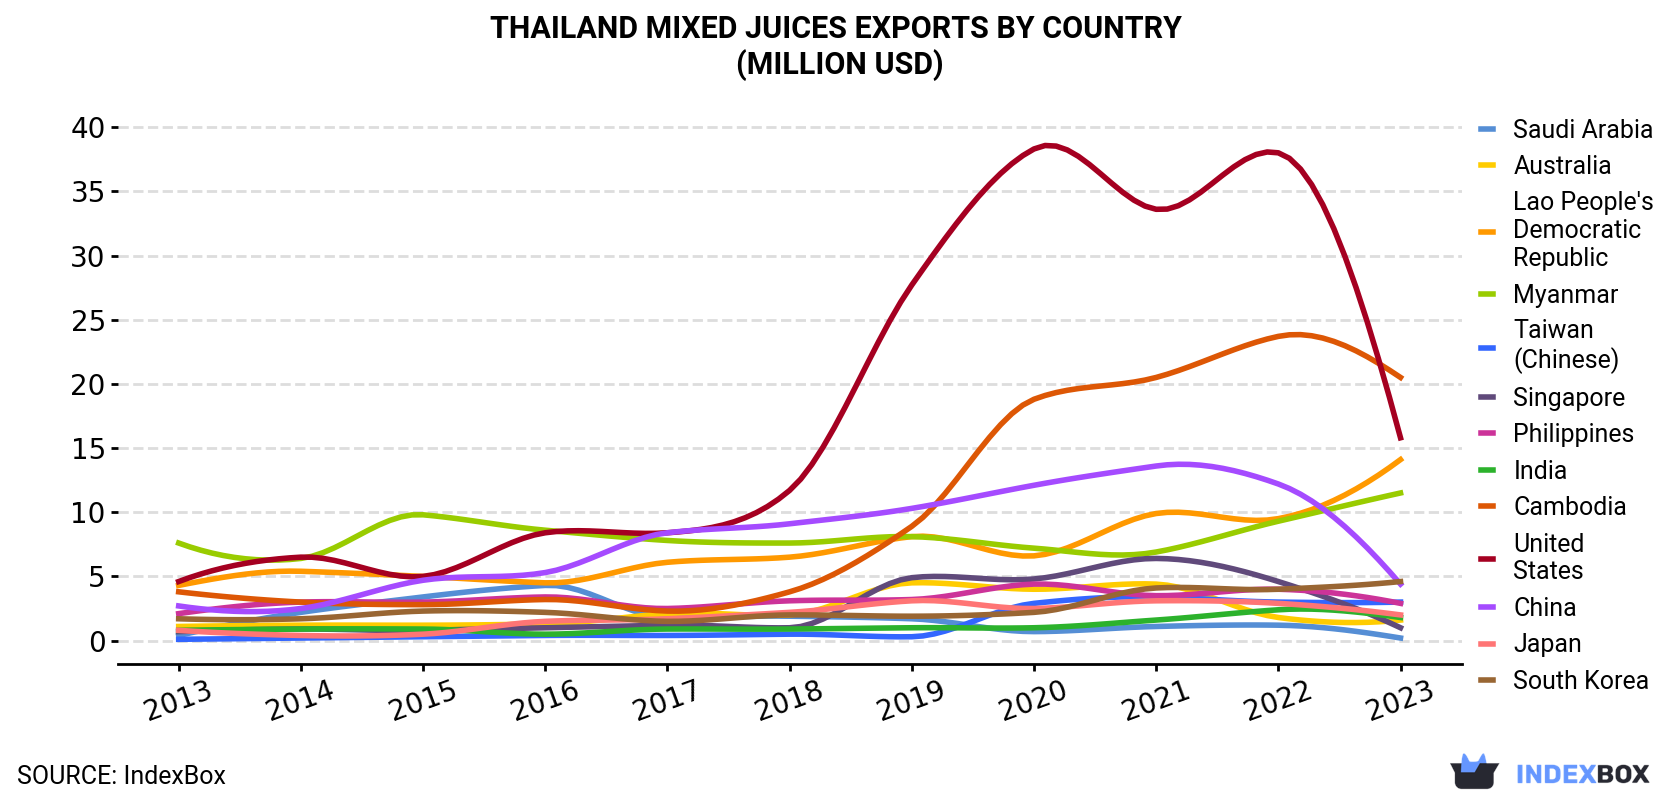 Thailand Mixed Juices Exports By Country (Million USD)